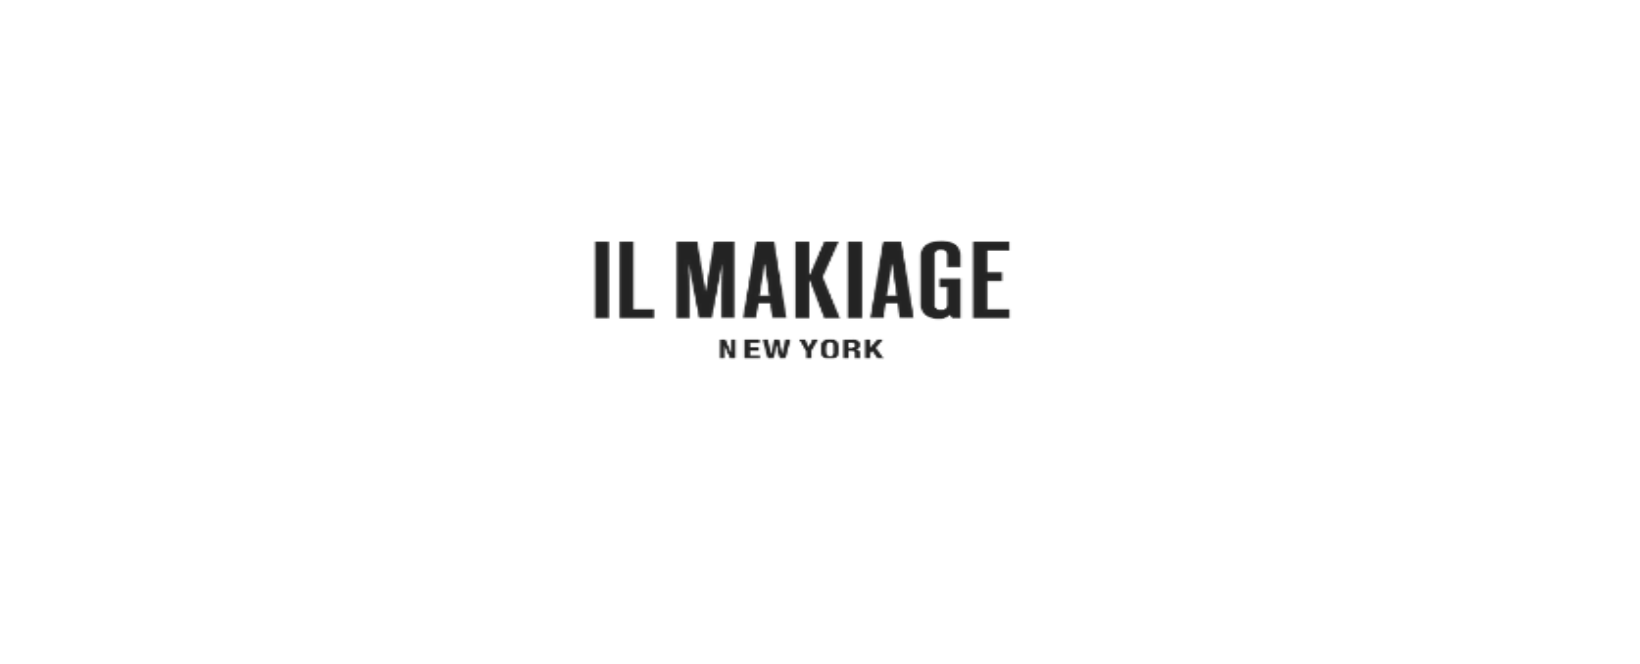 We tried the IL Makiage foundation to see if it’s worth the hype